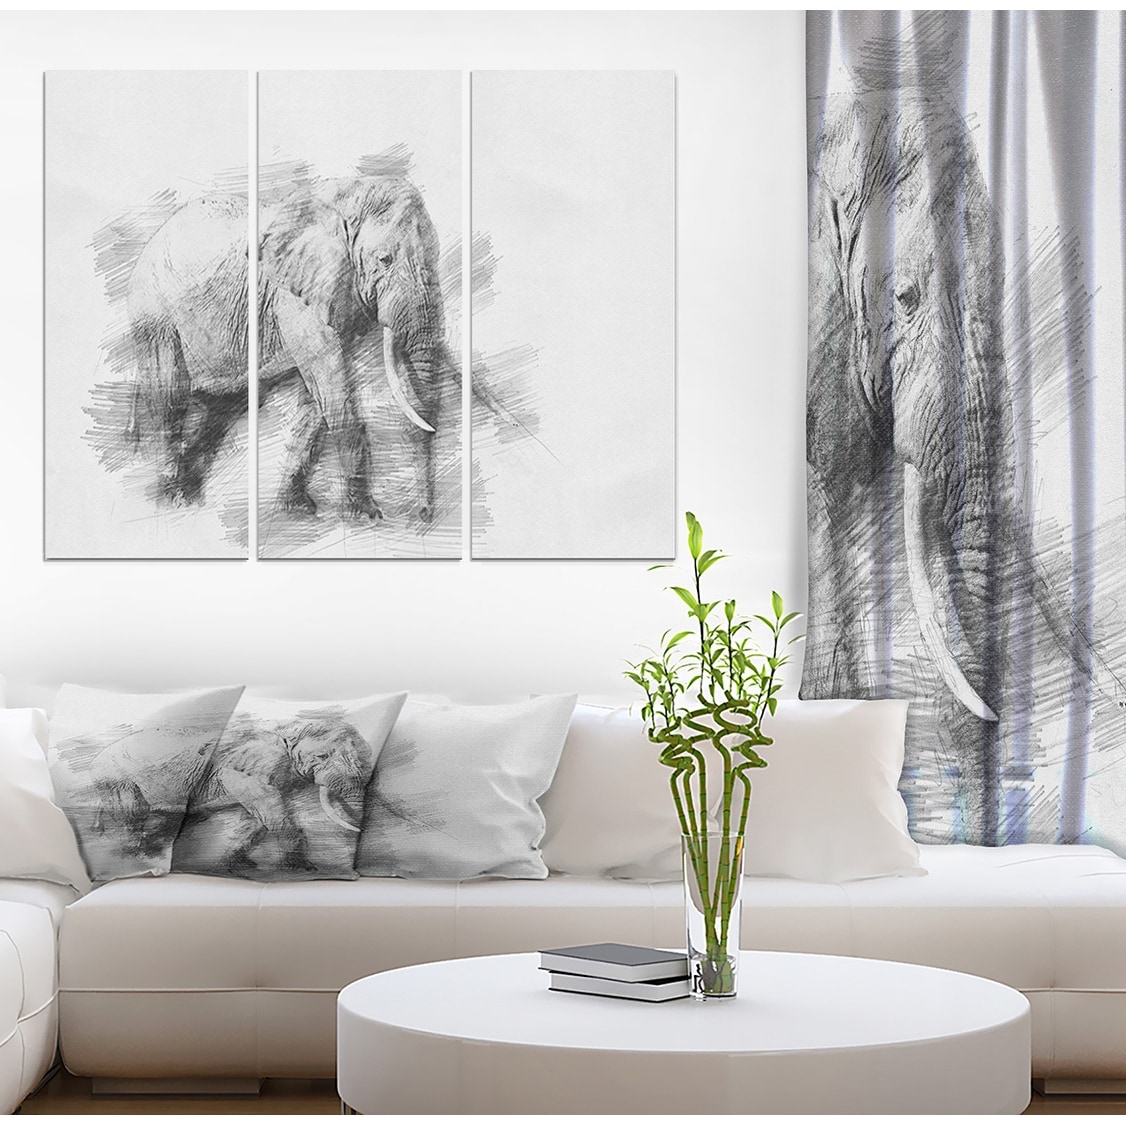 Designart 'Elephant in Black And White Pencil Sketch' Sketch Animals Print on Wrapped Canvas set - 36x28 - 3 Panels